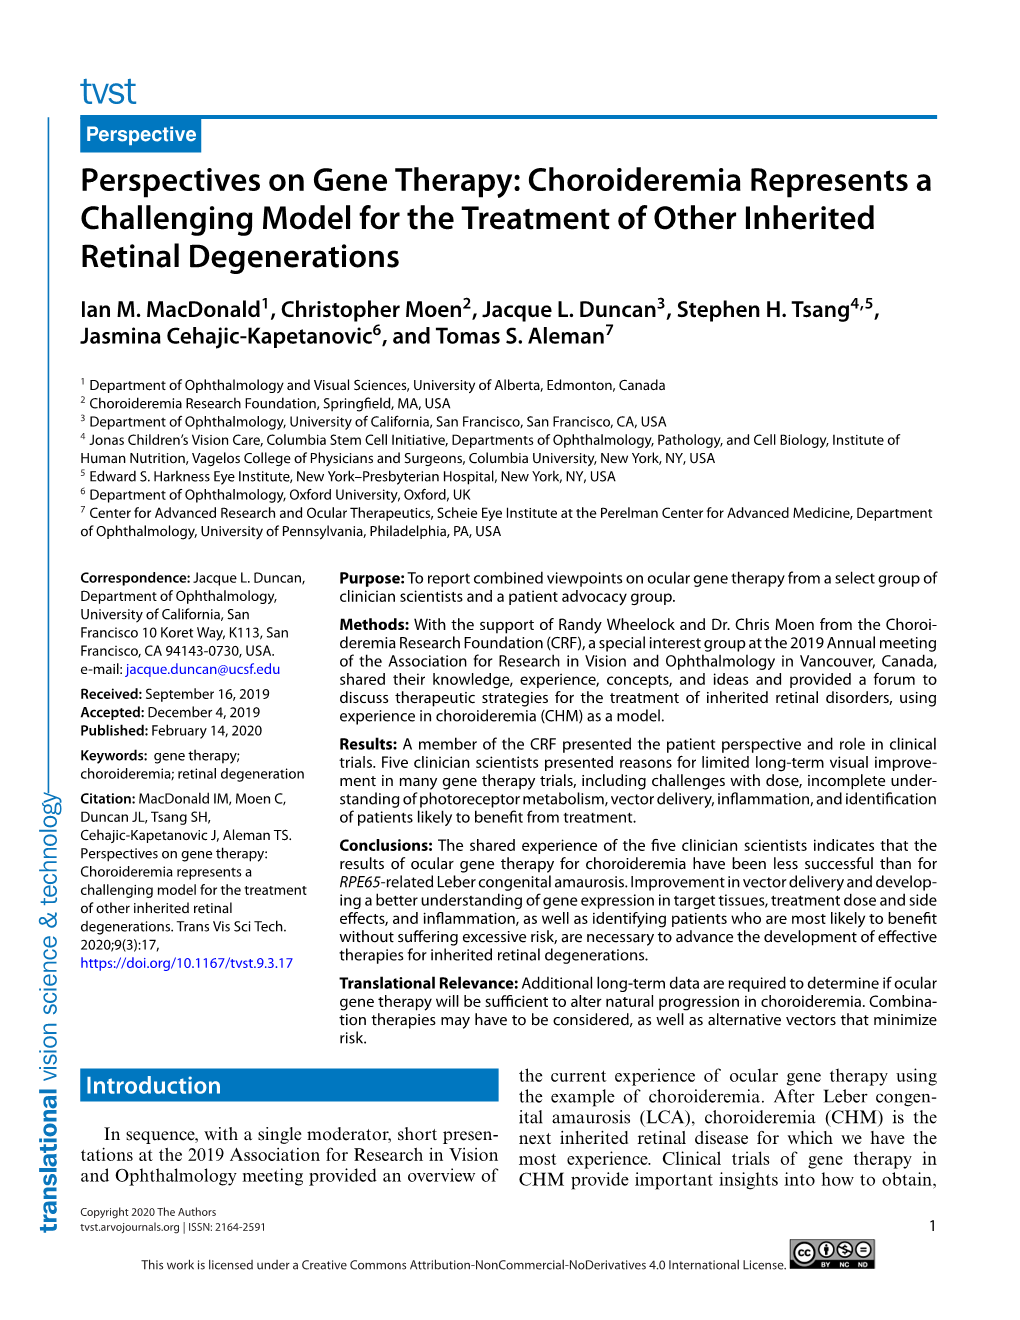 Perspectives on Gene Therapy: Choroideremia Represents a Challenging Model for the Treatment of Other Inherited Retinal Degenerations